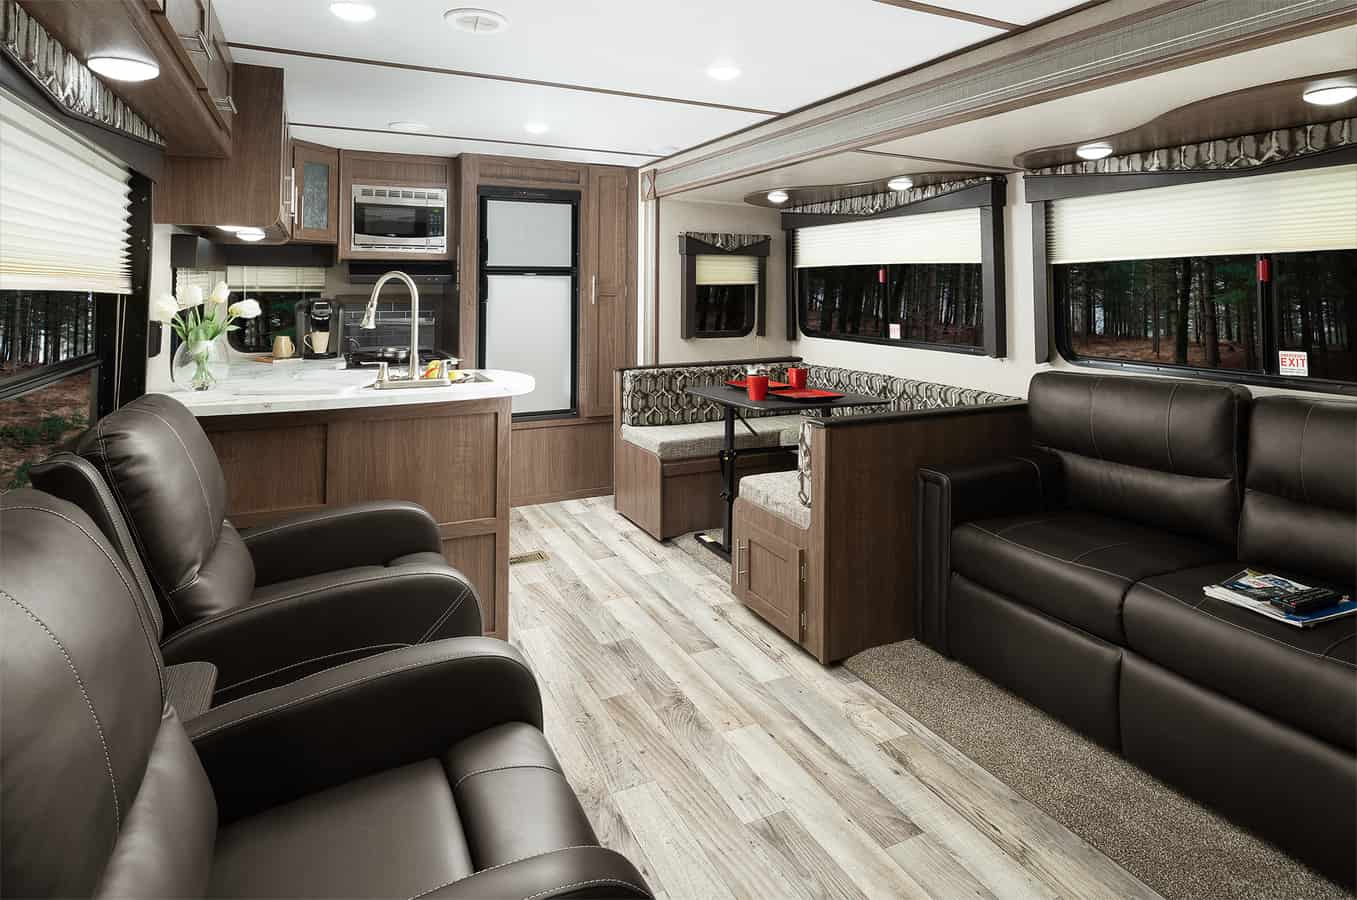 best travel trailers for family of 6